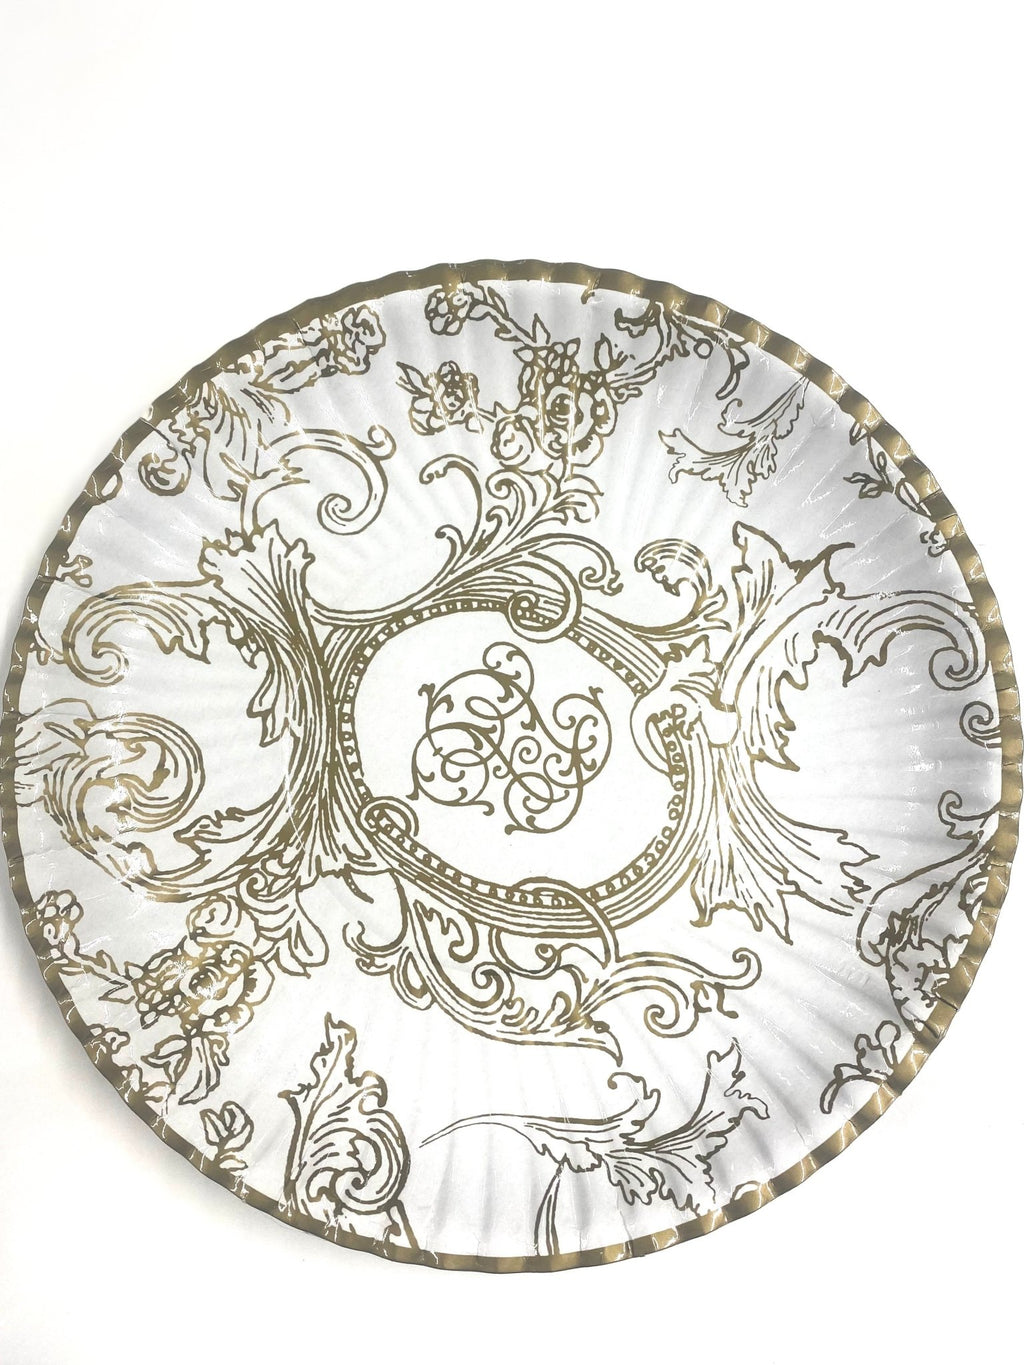 Gold Ornate Design Paper Plates-Pack Of 10 - The Grey Works